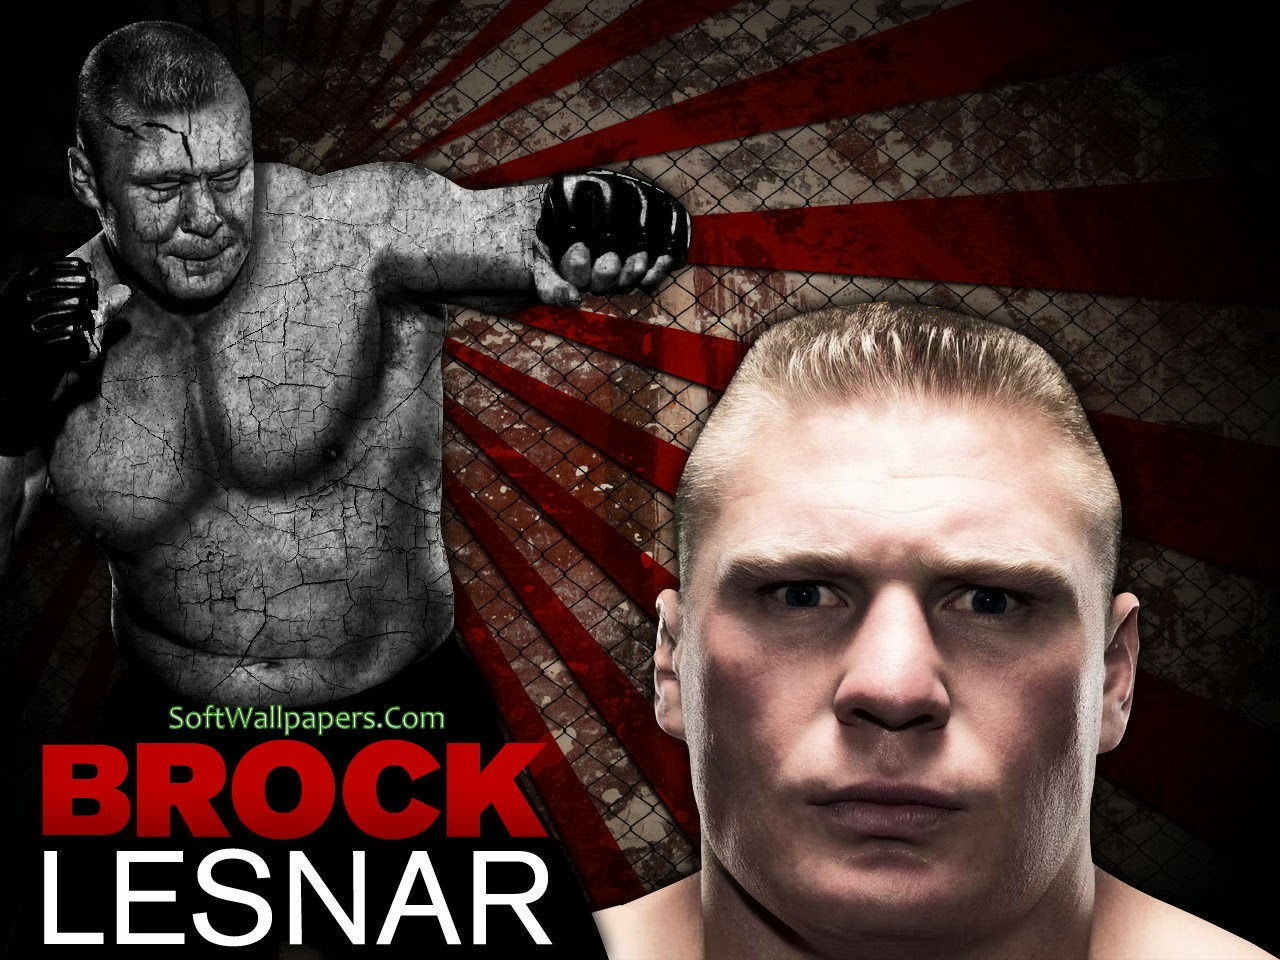 Free download Brock Lesnar WWE HD Wallpapers Soft Wallpapers [1280x960